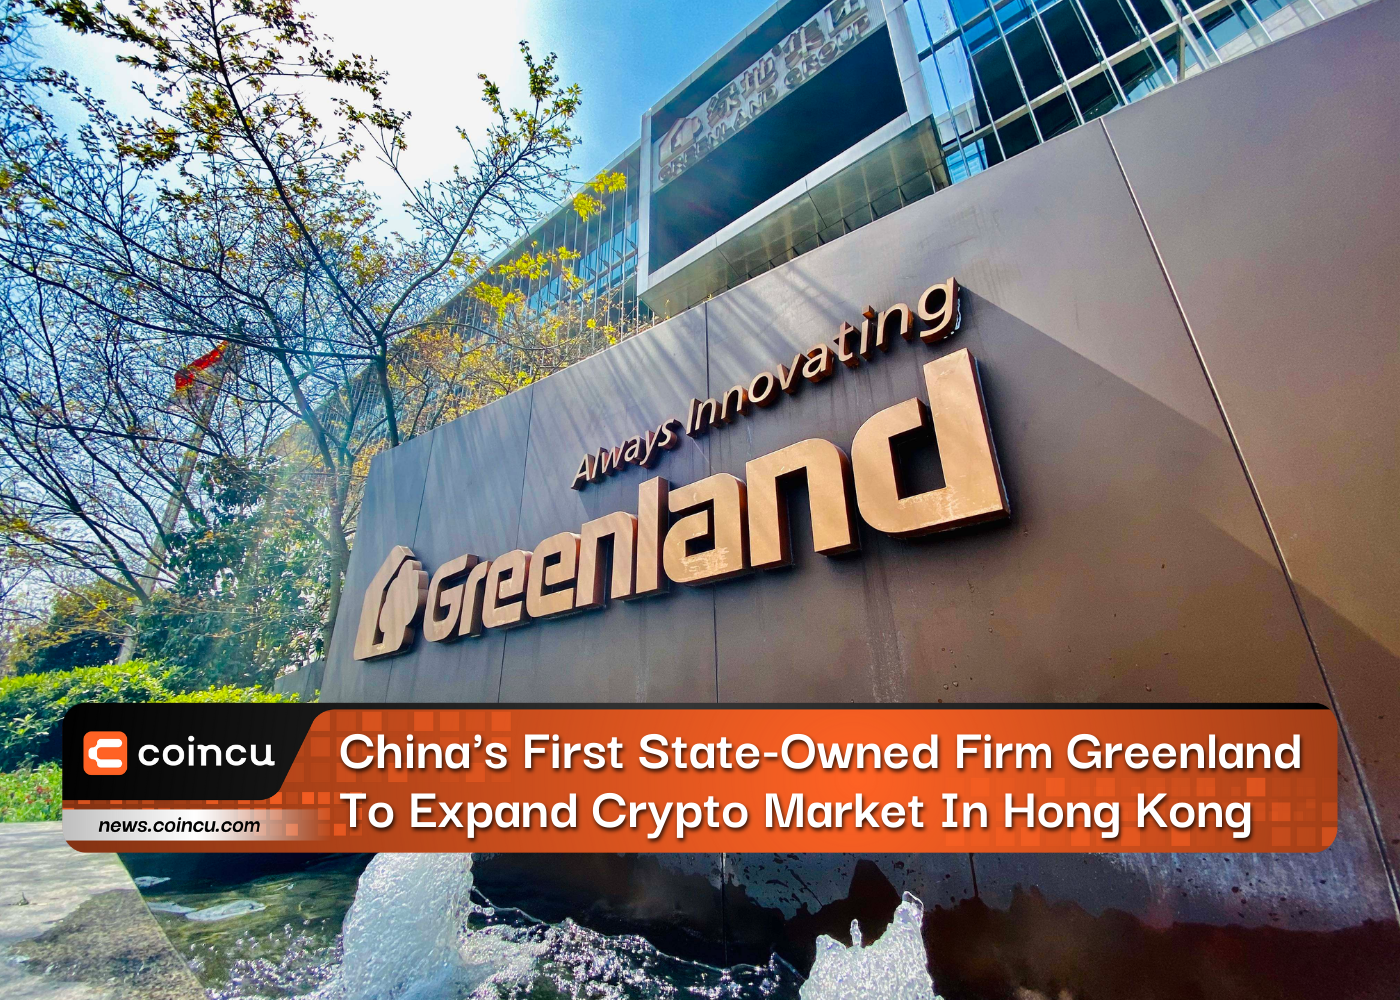 China's First State-Owned Firm Greenland To Expand Crypto Market In Hong Kong